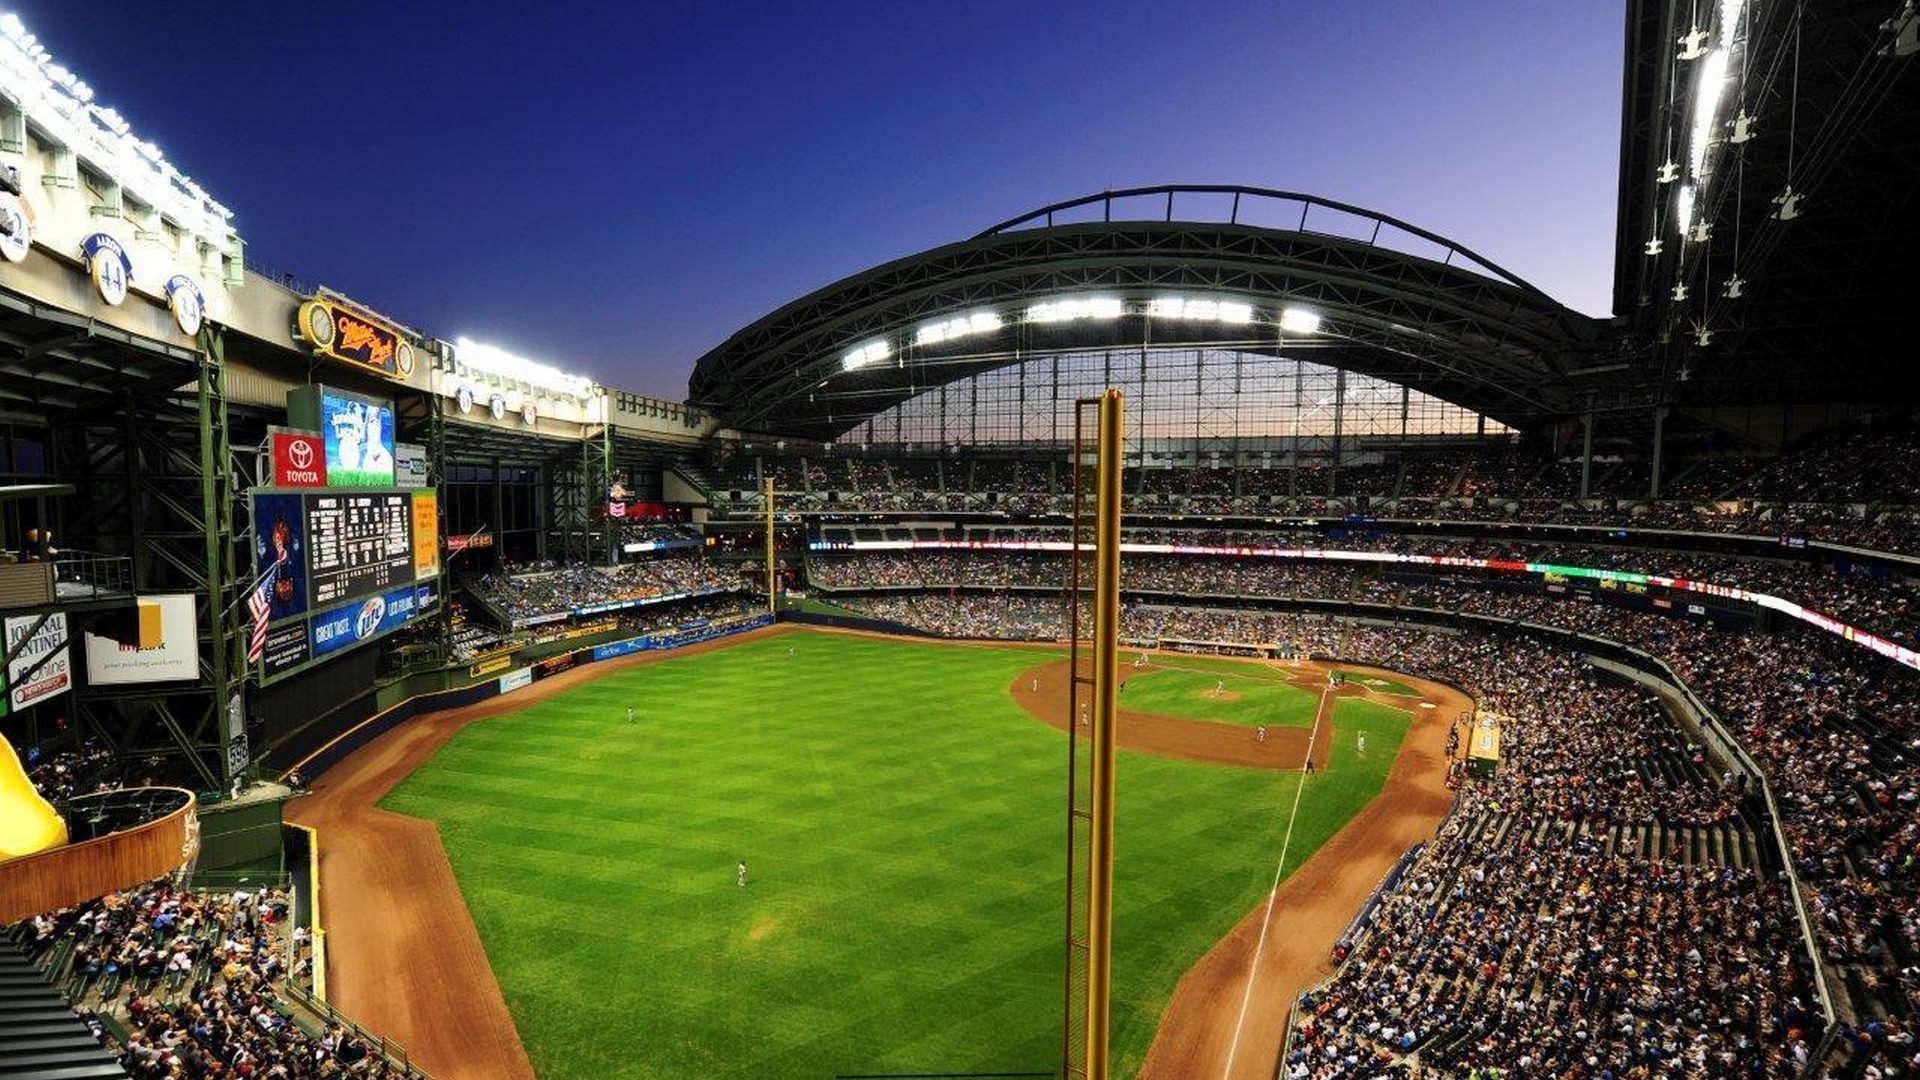 Milwaukee Brewers Stadium Laptop Wallpaper with high-resolution 1920x1080 pixel. You can use this wallpaper for Mac Desktop Wallpaper, Laptop Screensavers, Android Wallpapers, Tablet or iPhone Home Screen and another mobile phone device